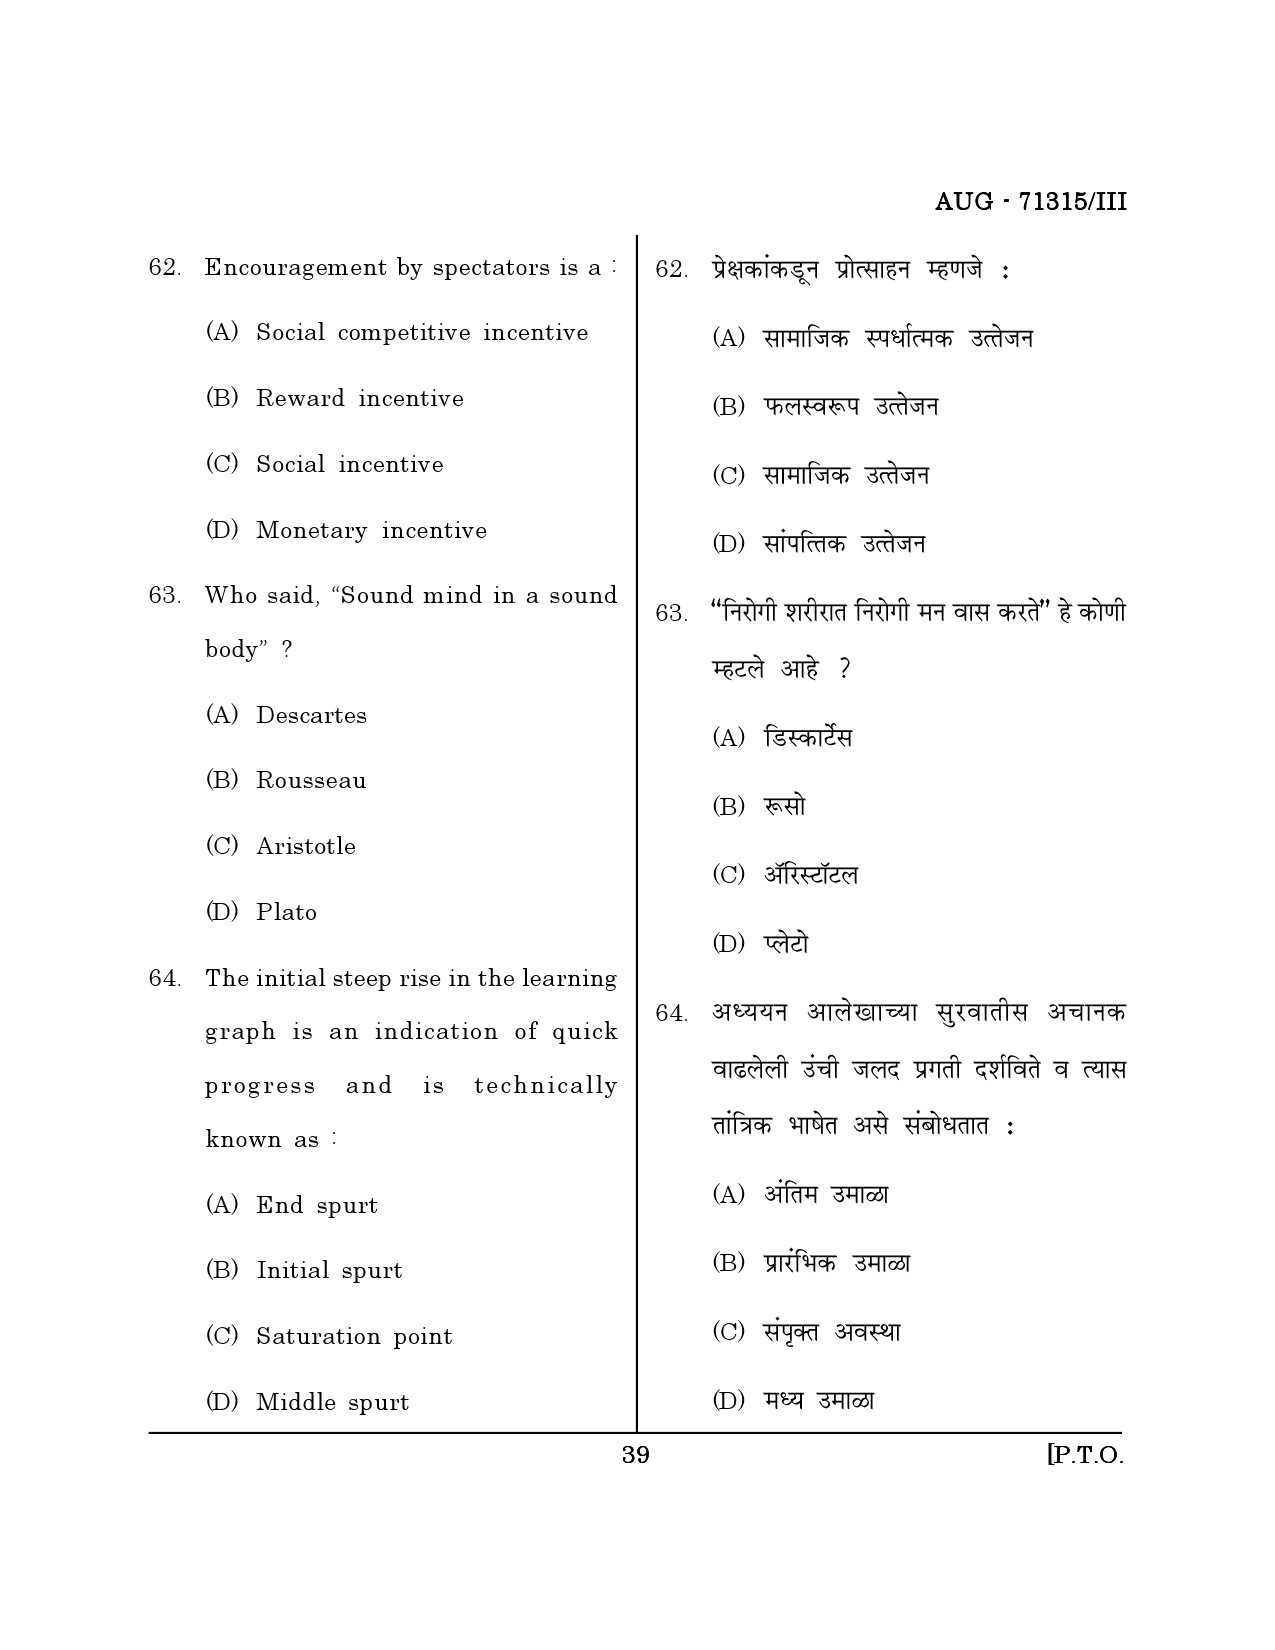 Maharashtra SET Physical Education Question Paper III August 2015 38